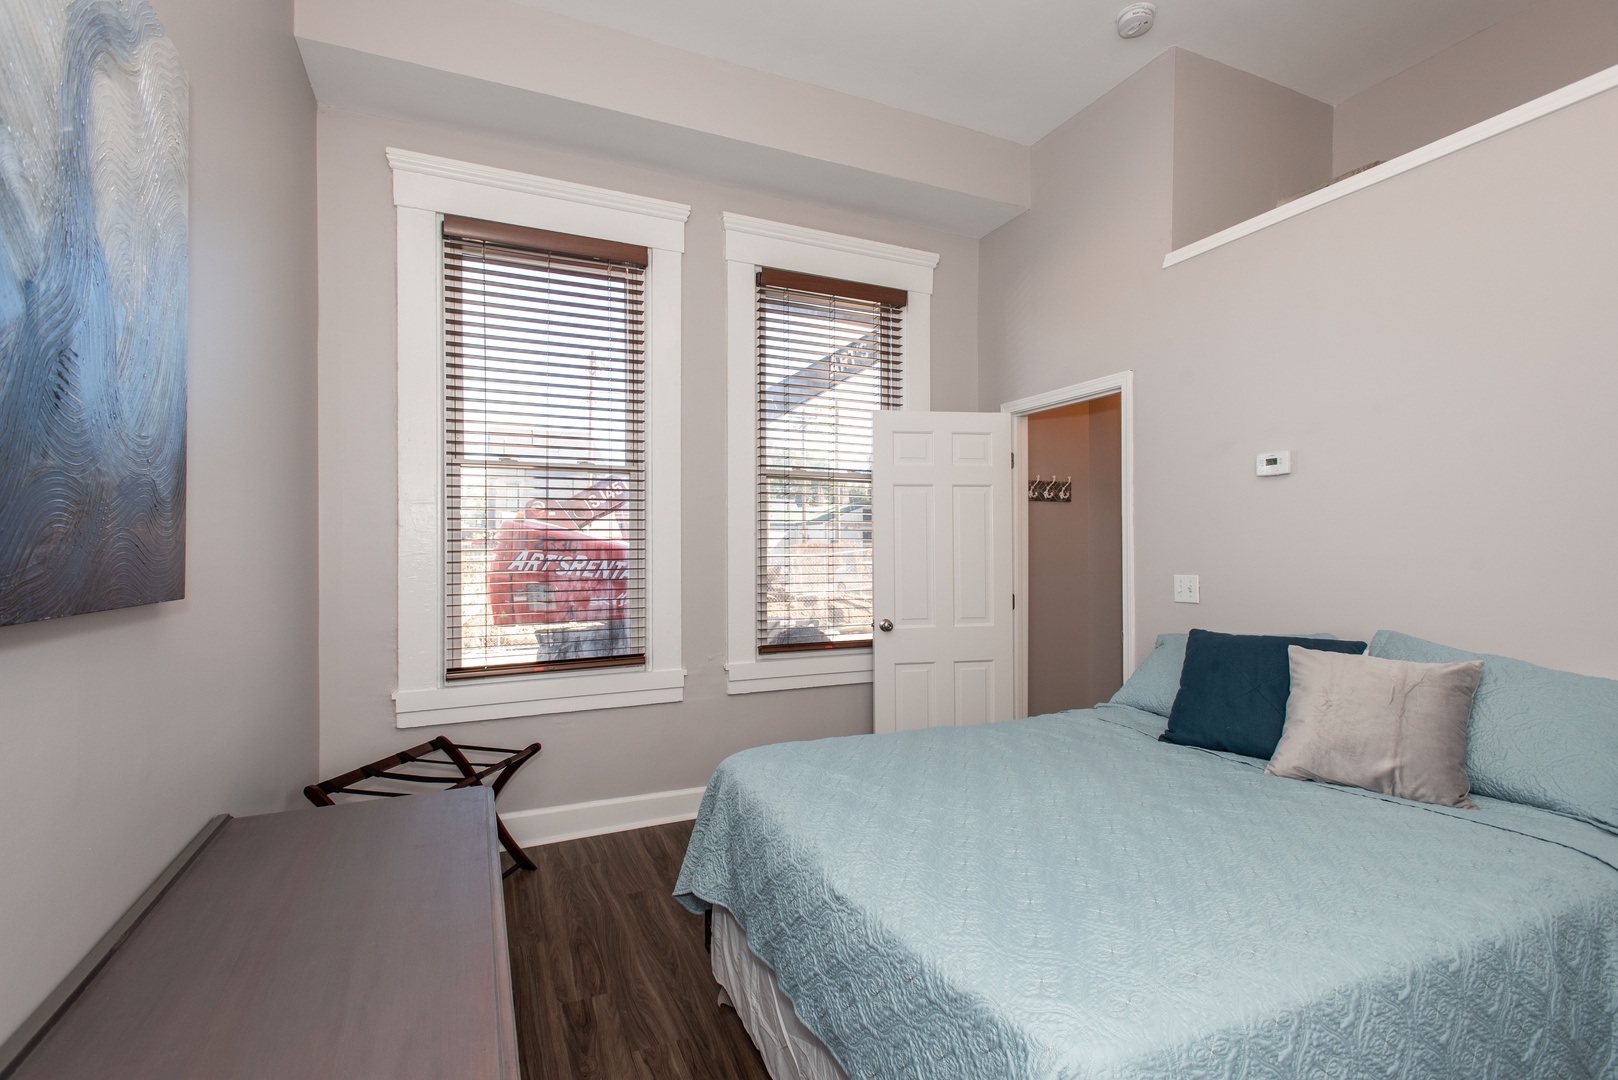 Apt 1 – The bedroom offers a spacious queen bedroom with a large closet